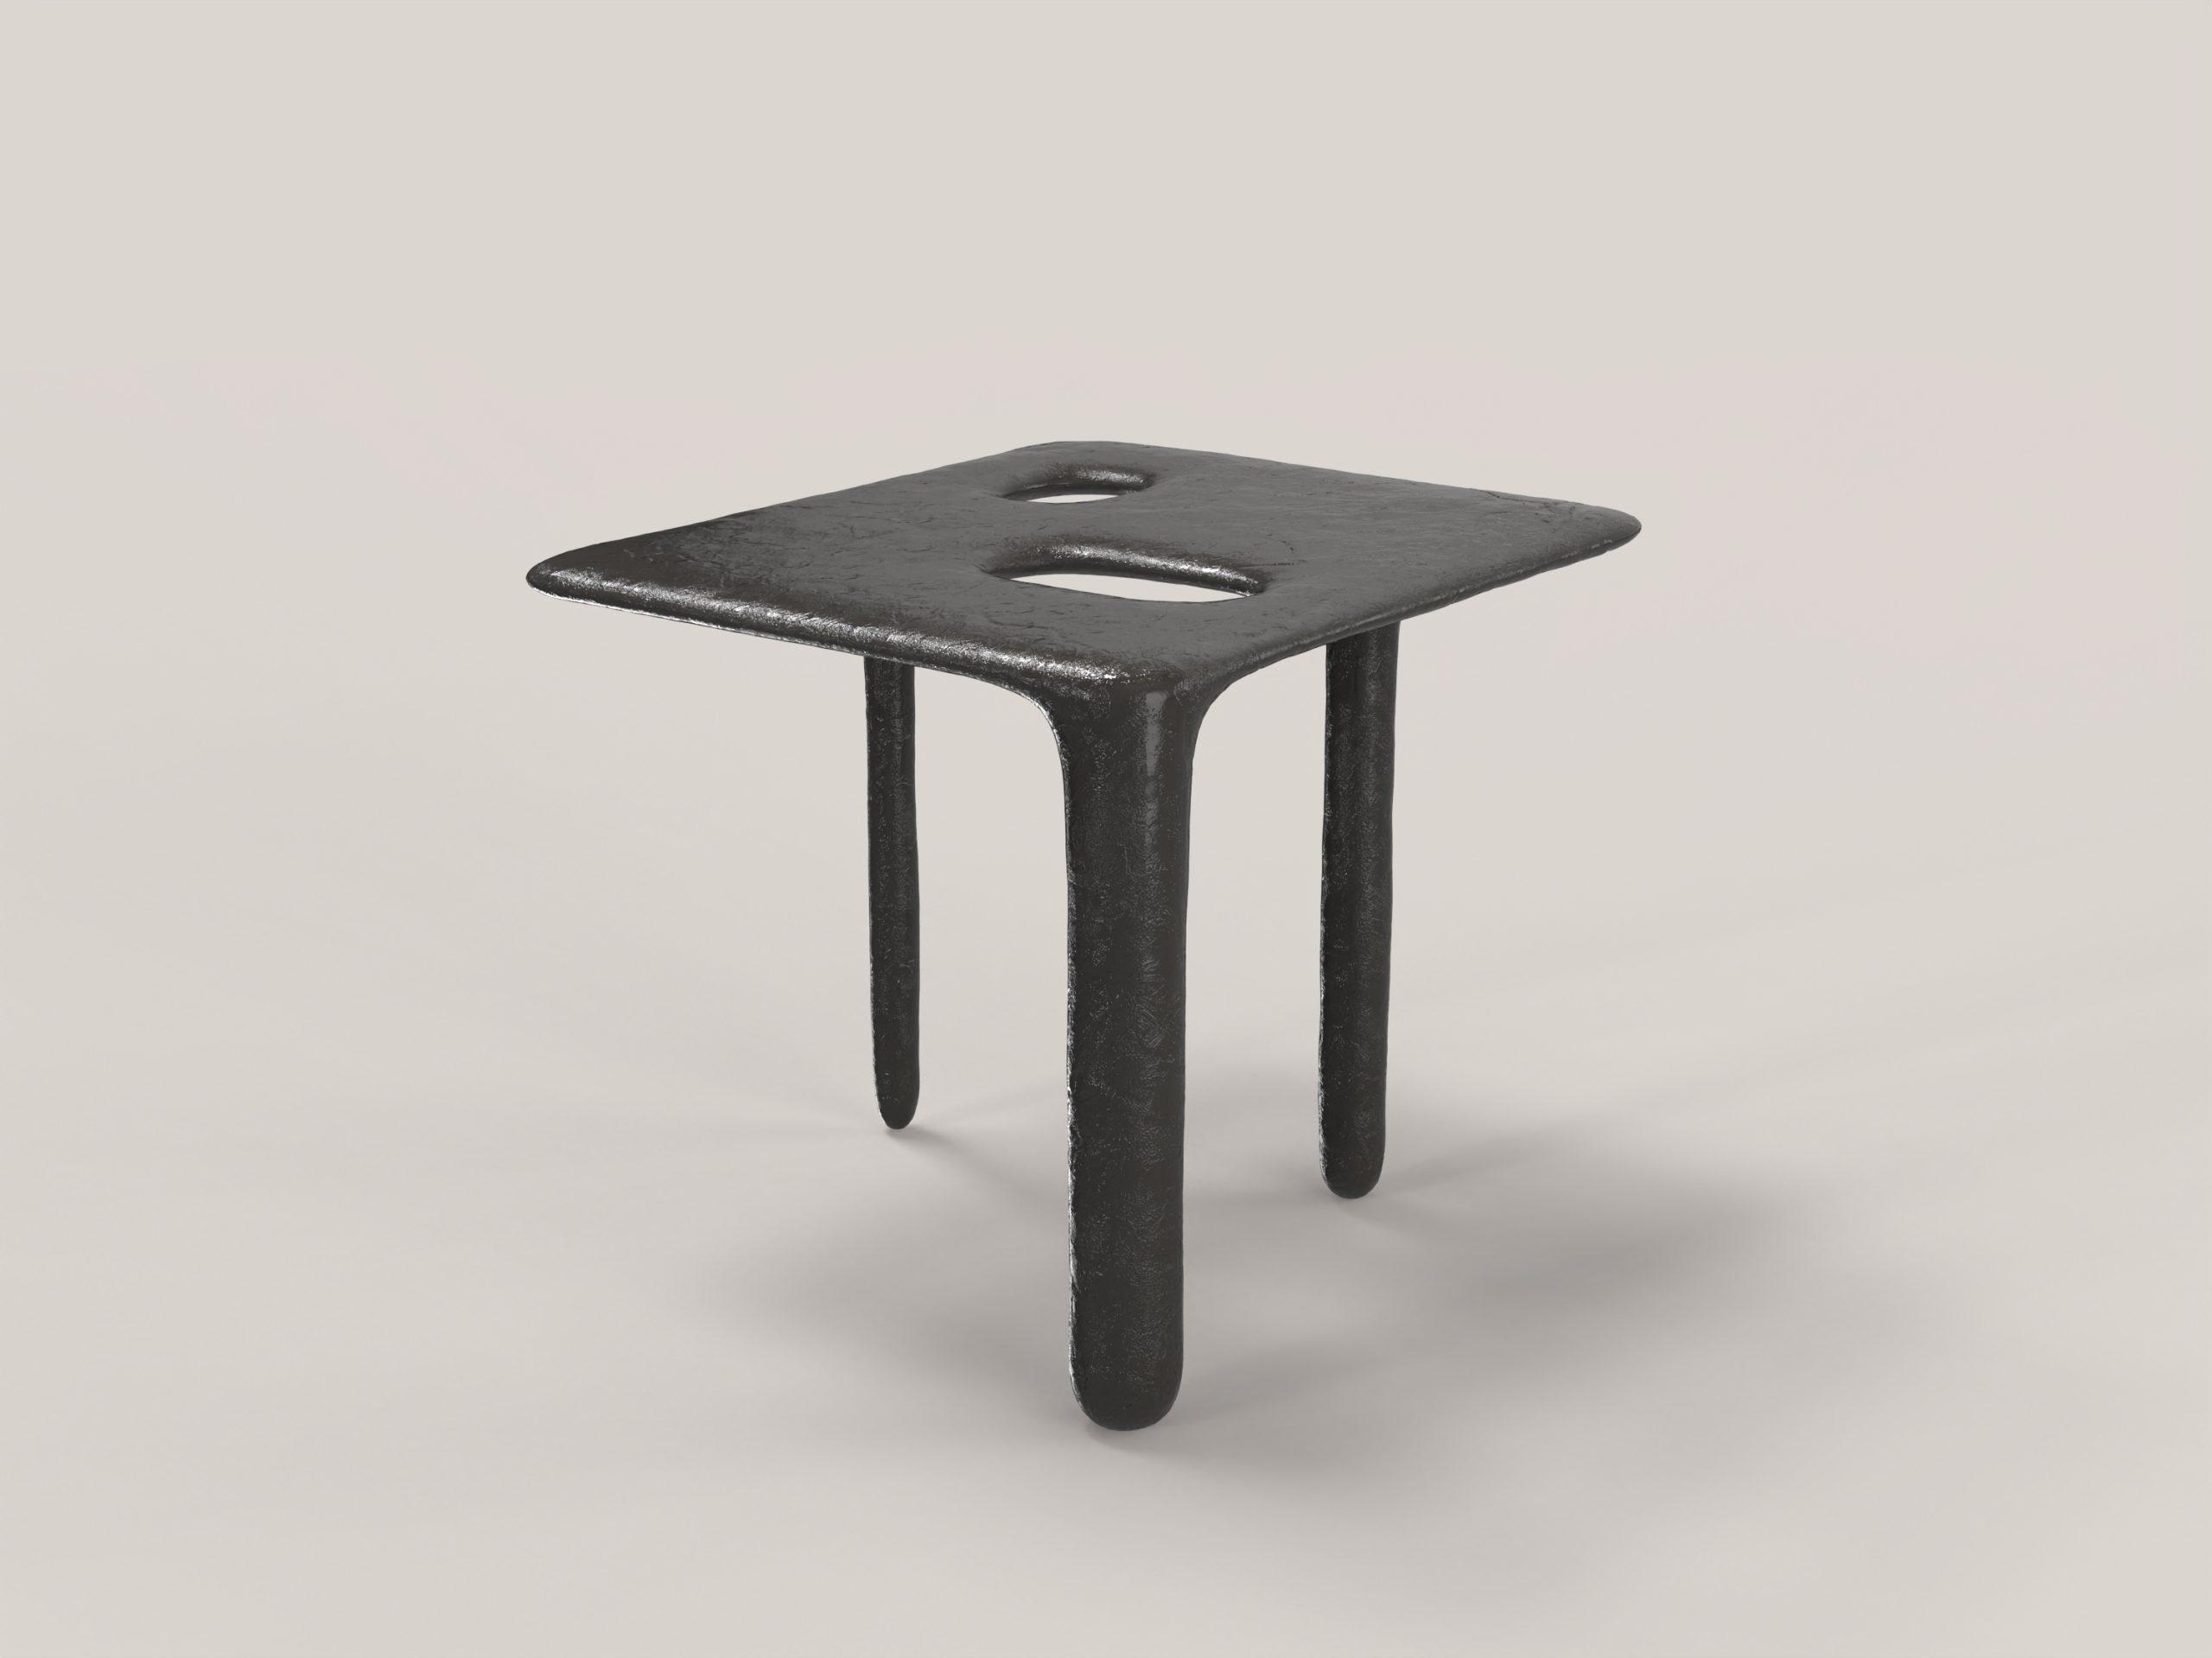 Set of 2 Oasi V1 and V2 Low Tables by Edizione Limitata For Sale 3